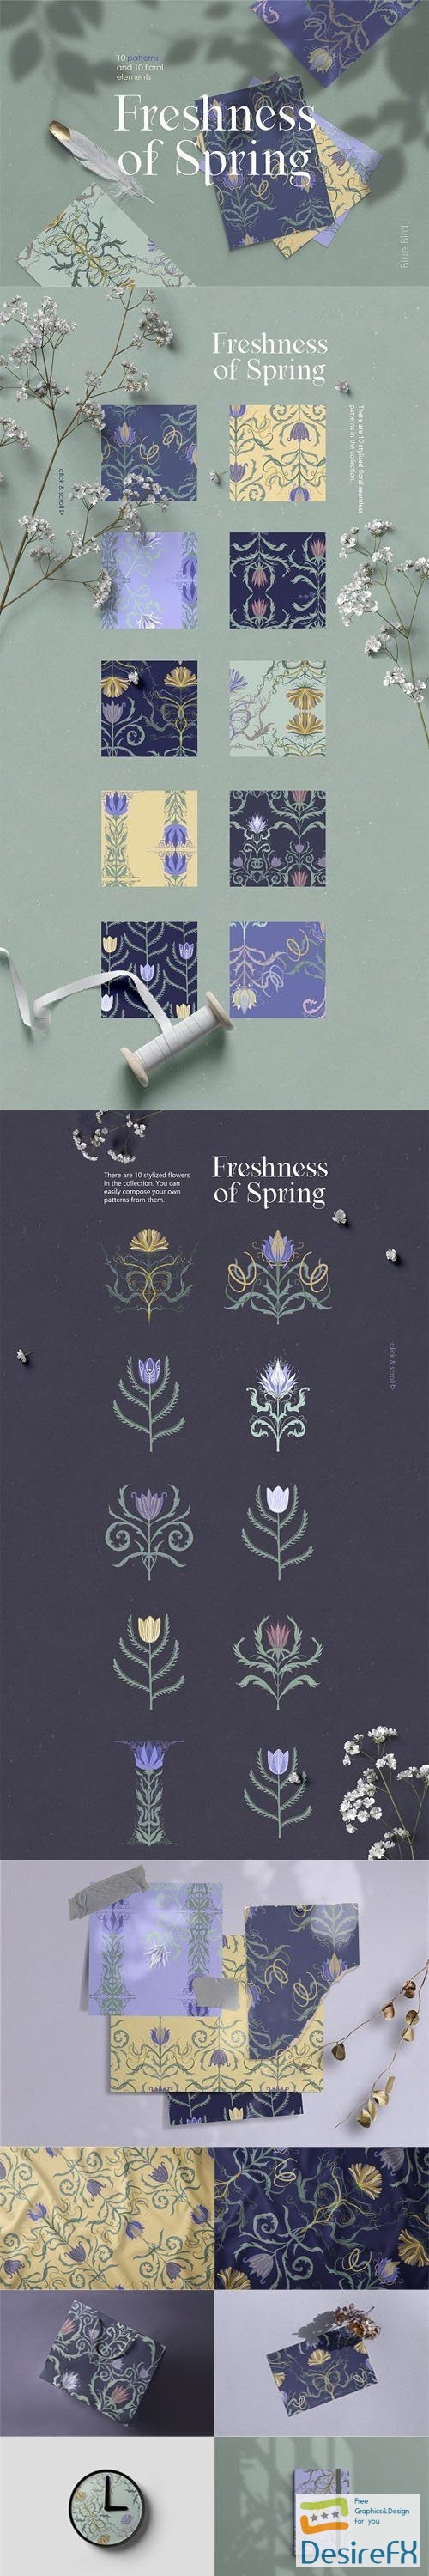 Freshness of Spring - Floral Patterns Collection